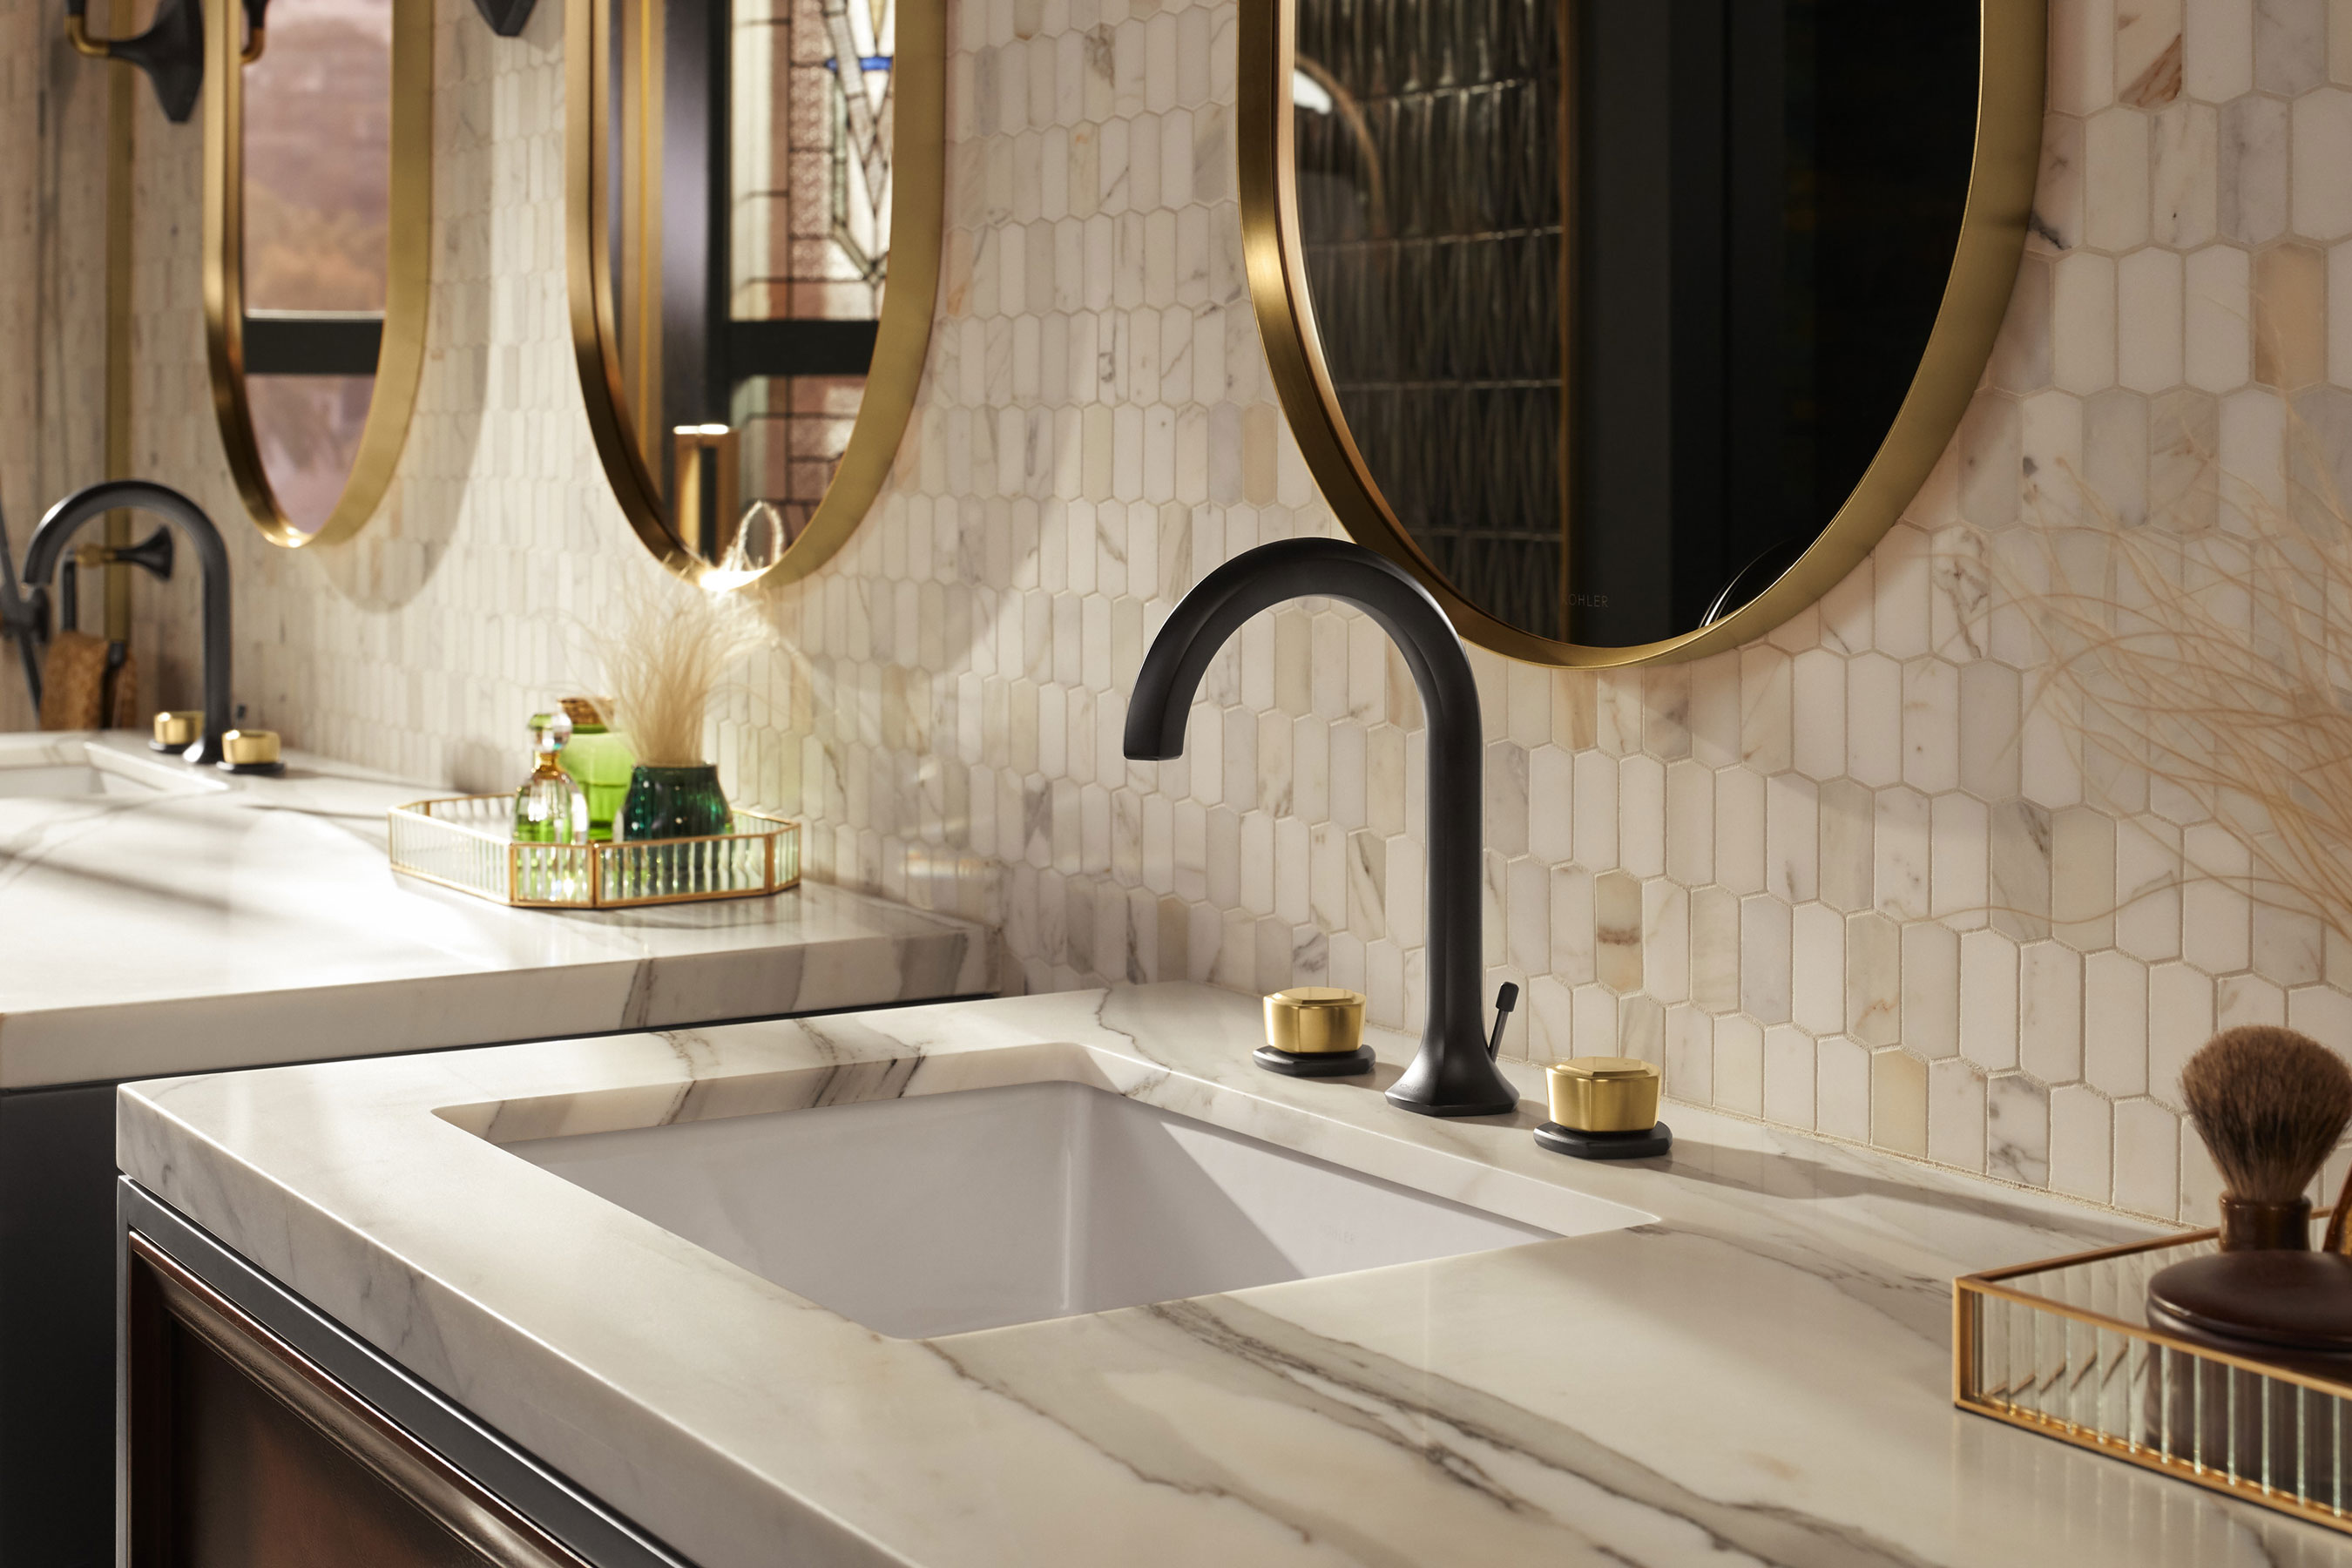 KOHLER Occasion Faucet Collection Features Old Hollywood Glamour